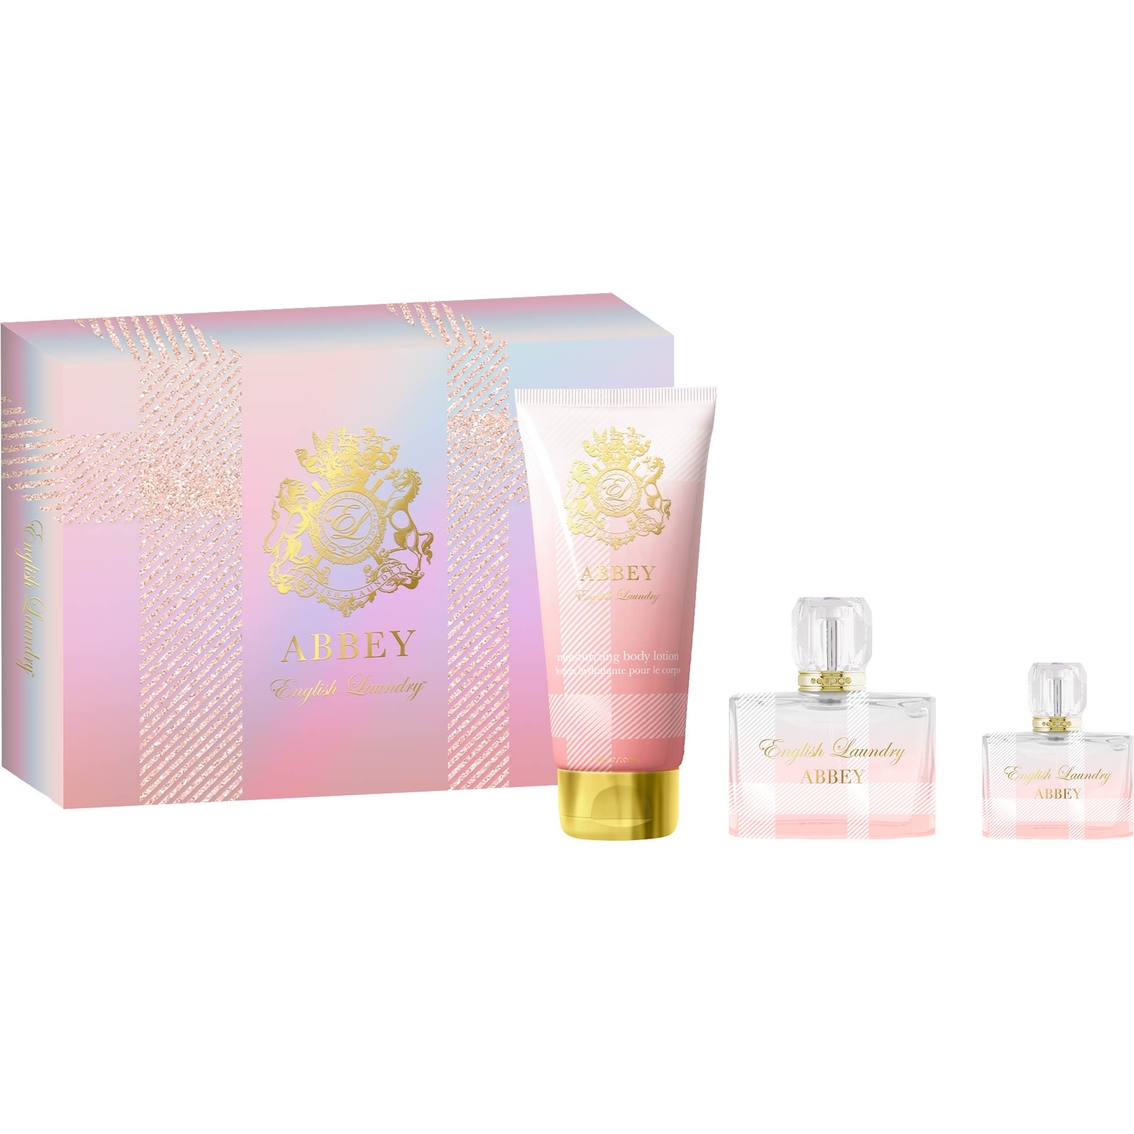 English Laundry Abbey Eau De Parfum Gift Set | Gifts Sets For Her ...